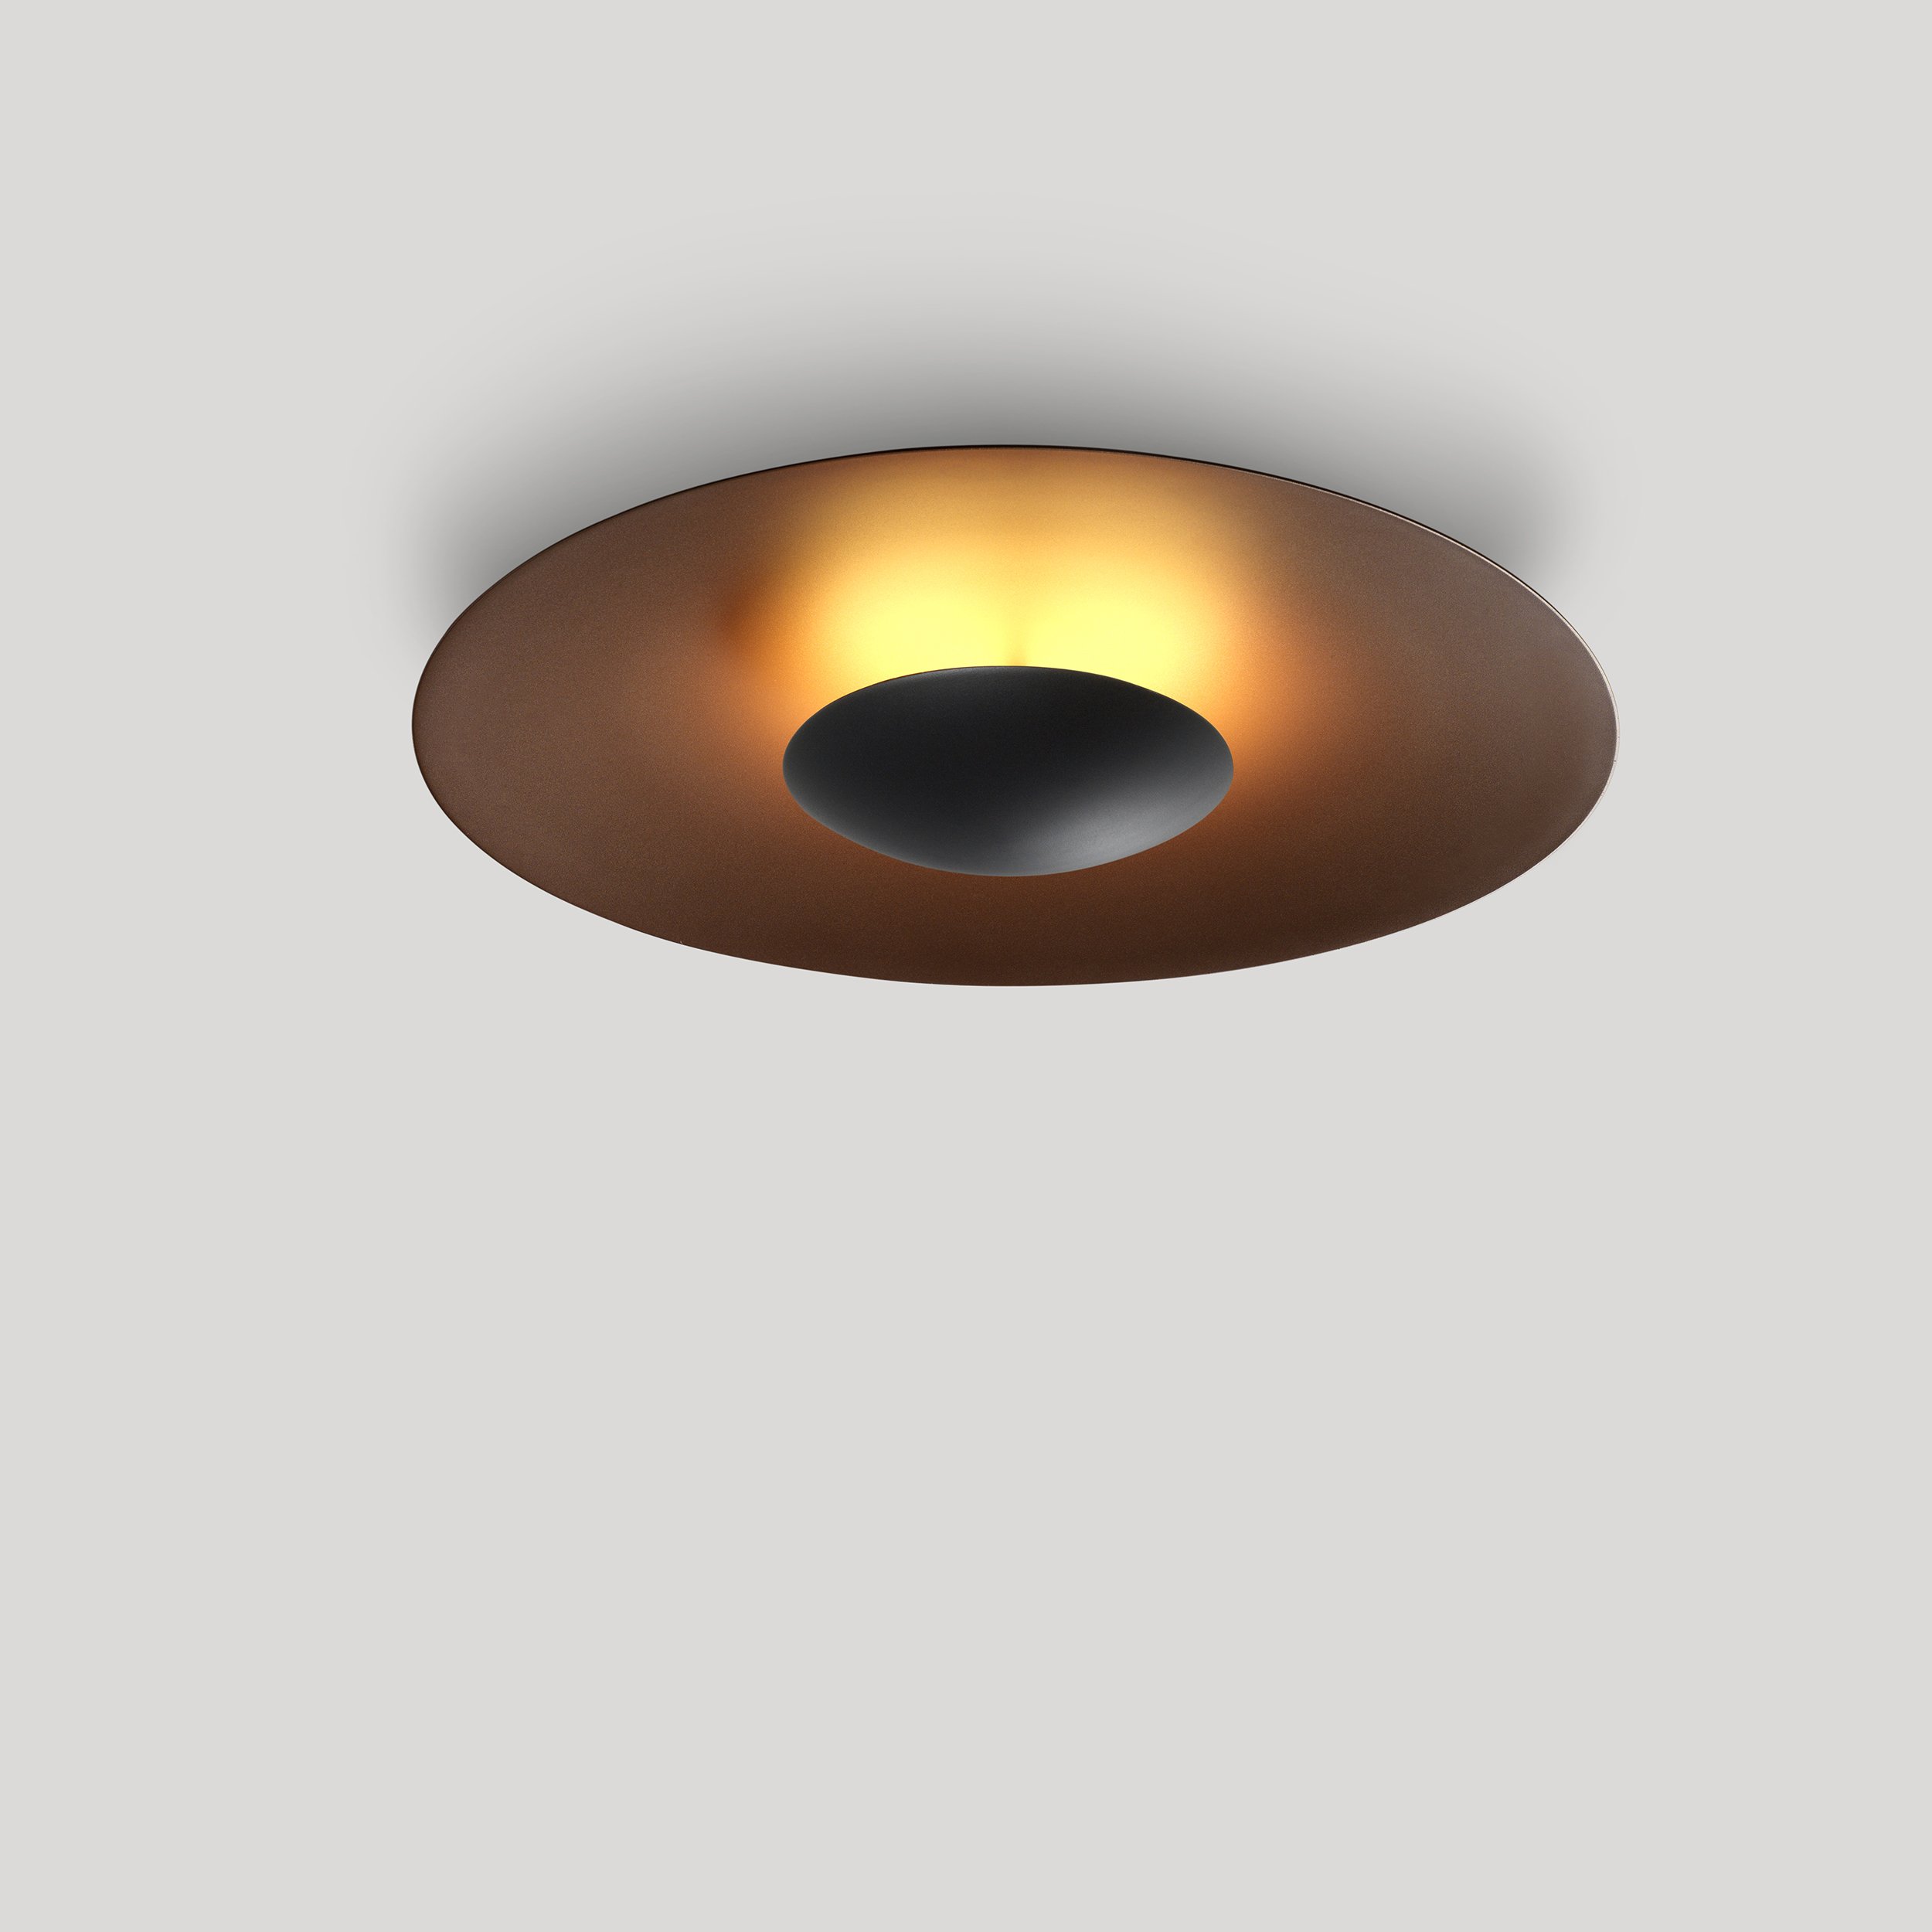 Ginger Outdoor Wall/Ceiling Light by Marset | A662-654-39 | MAR1124477